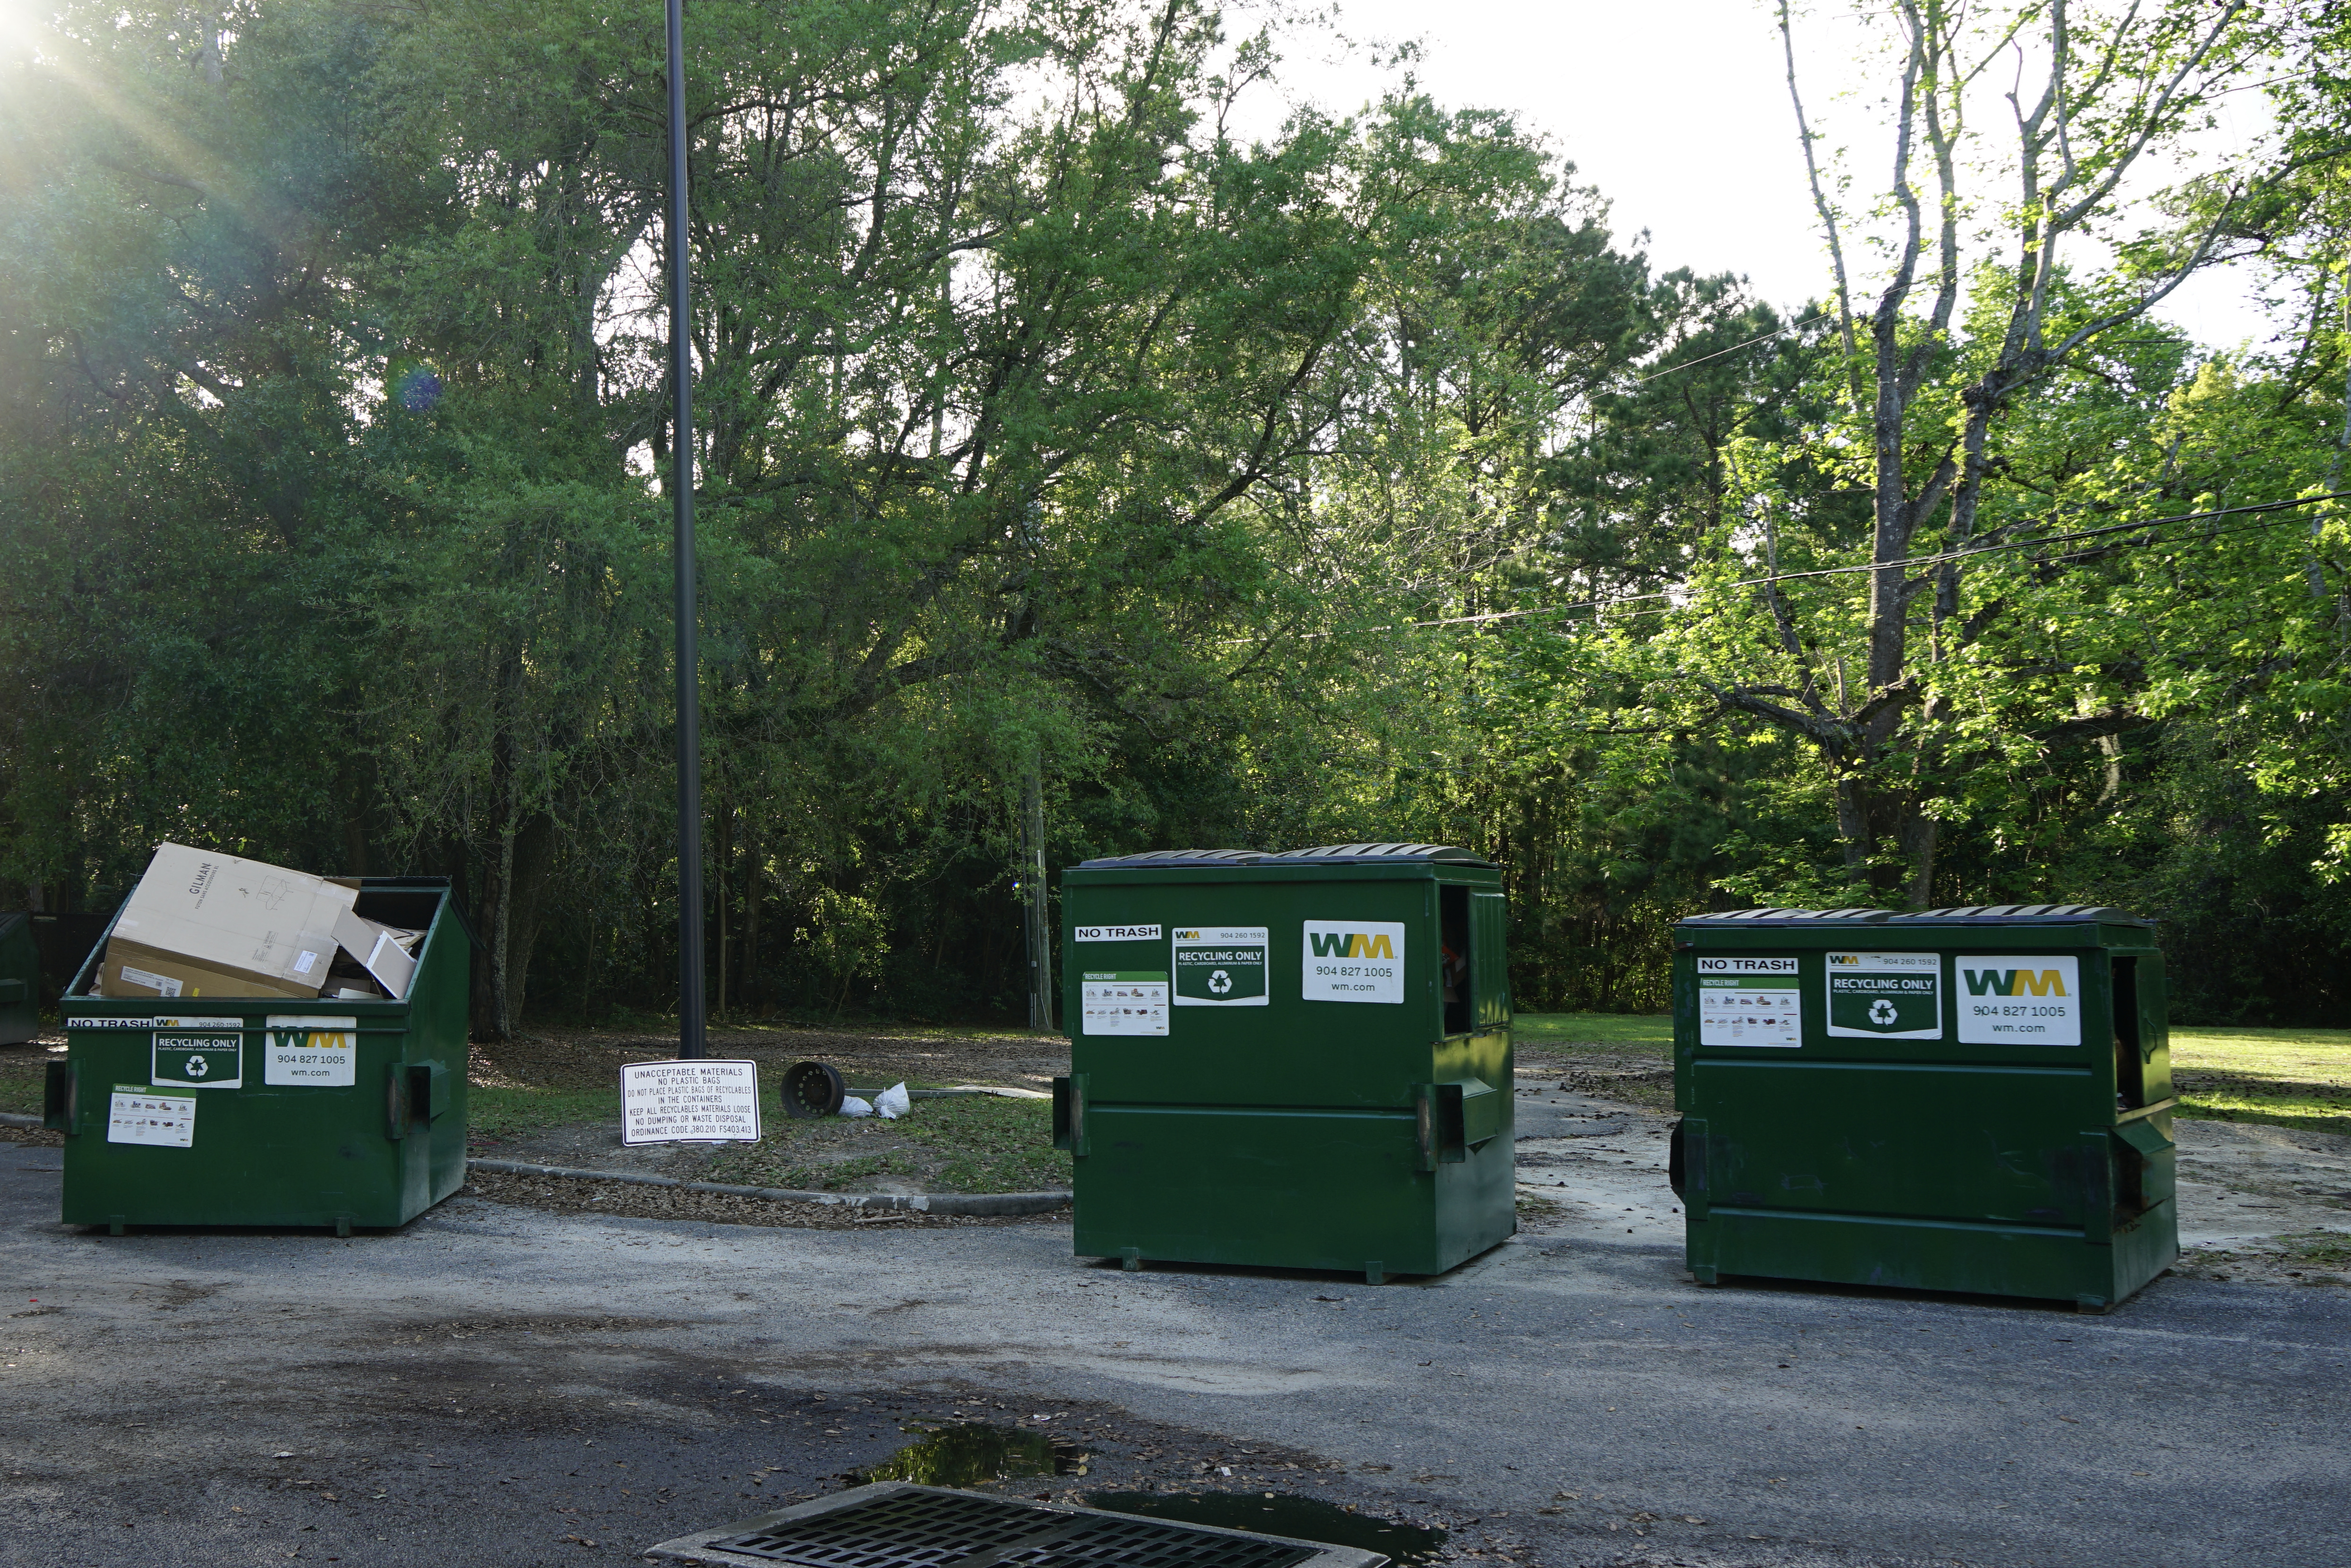 Three big dumpsters located in one of the city parks